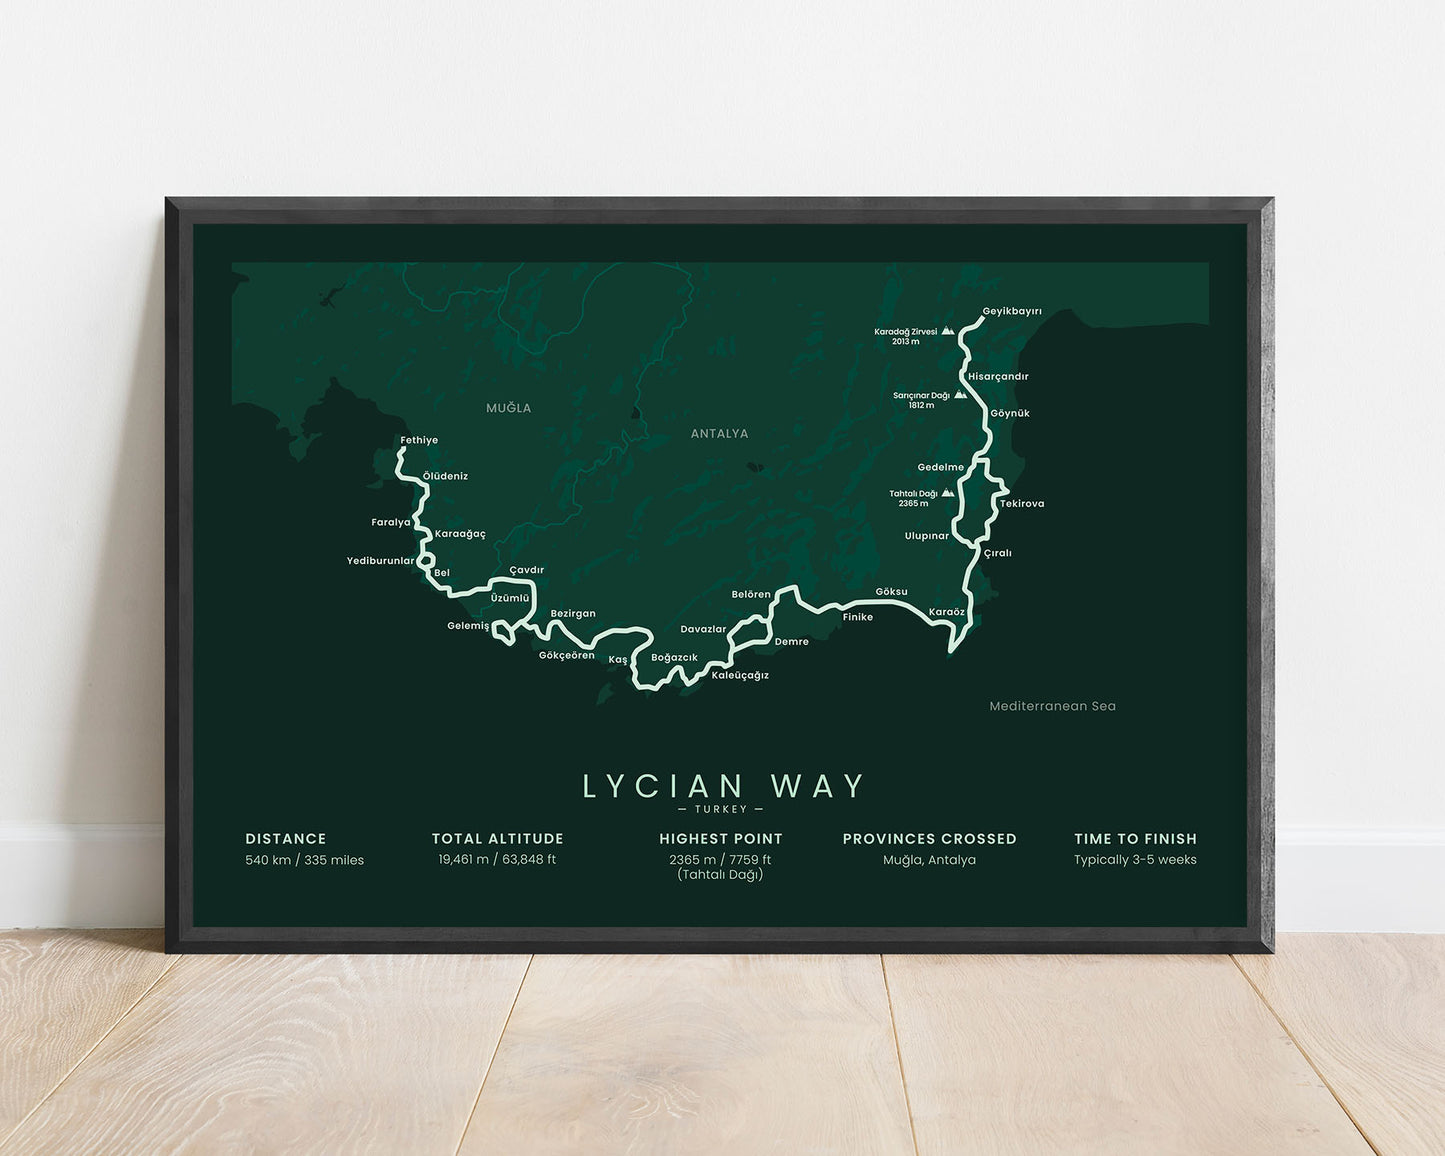 Lycian Way hiking trail in Mediterranean, South Turkey, minimalist map poster with black frame and green background